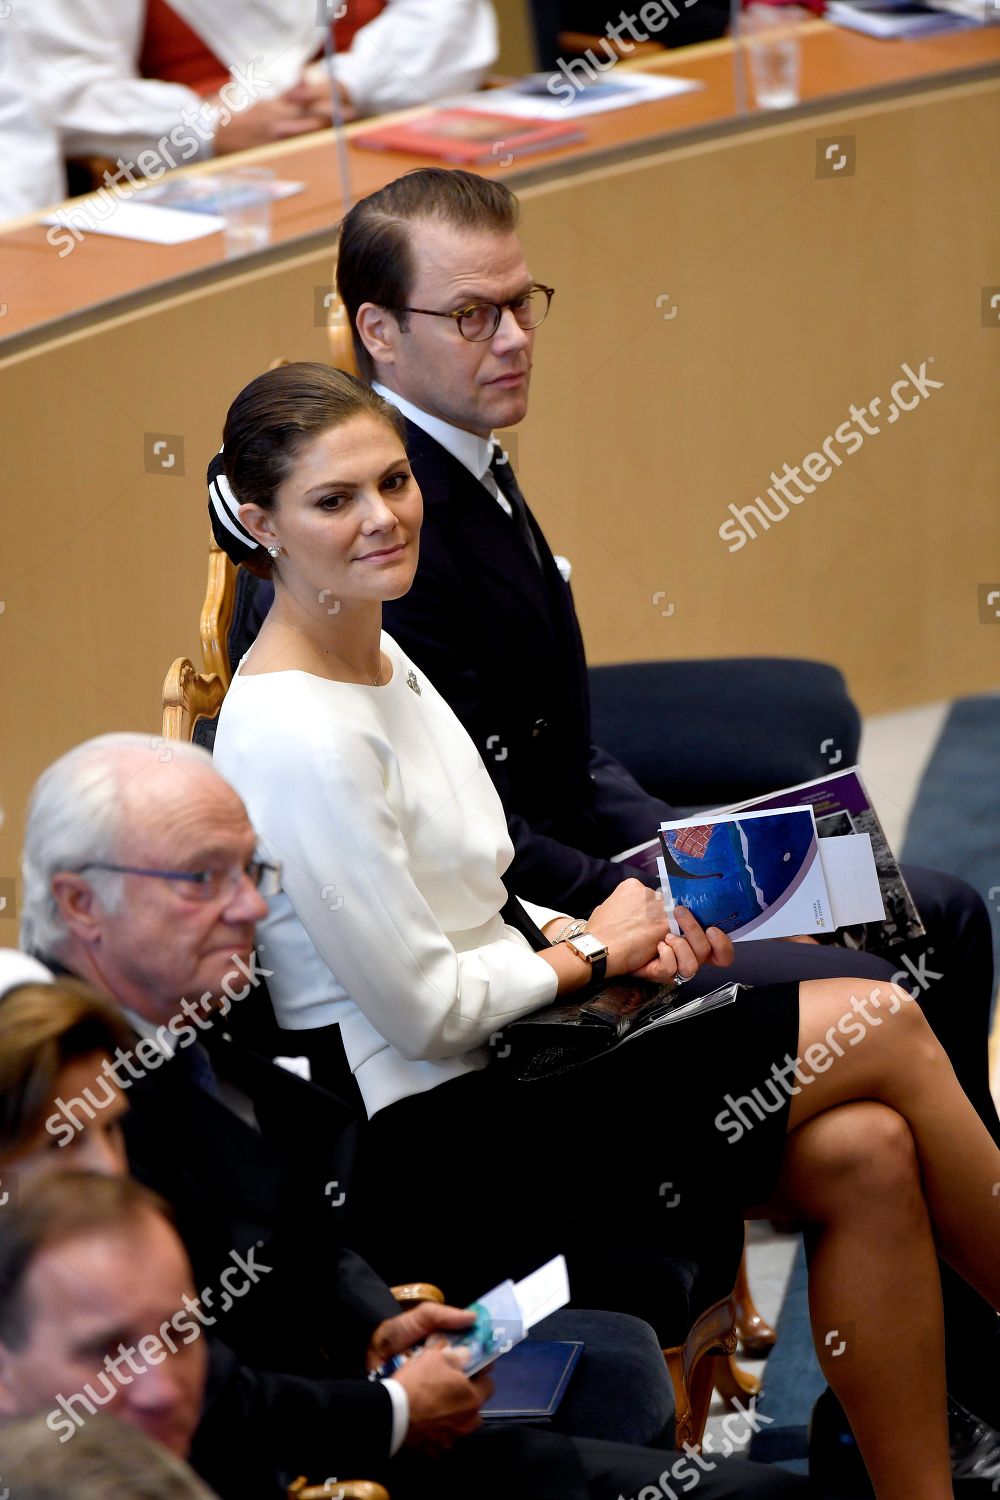 opening-of-the-parliamentary-session-stockholm-sweden-shutterstock-editorial-9894440m.jpg